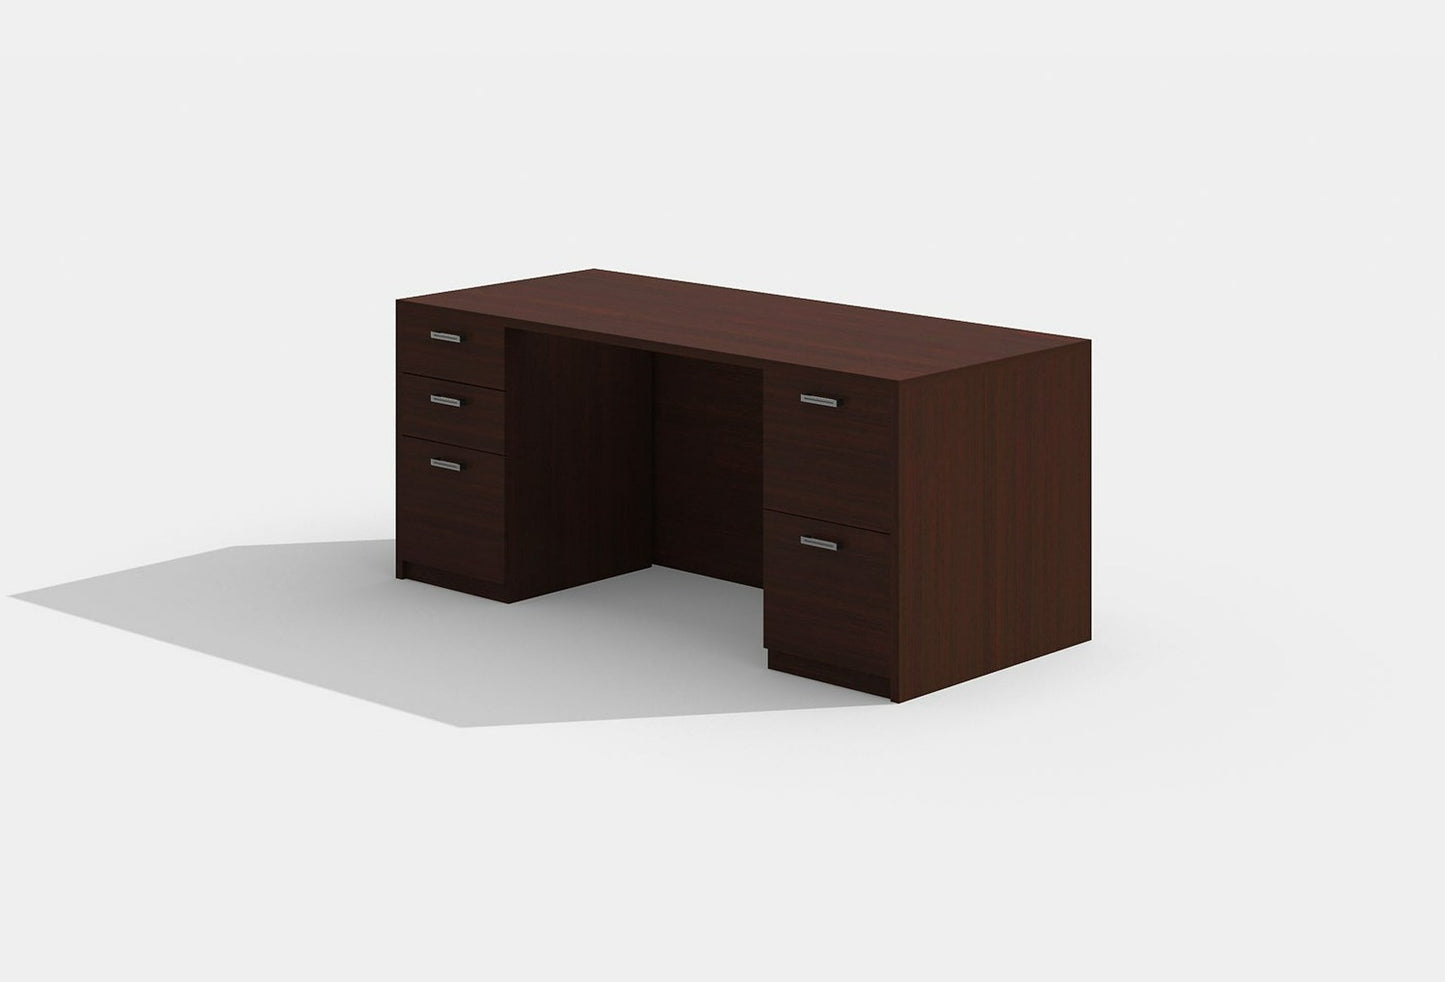 Load image into Gallery viewer, Amber Executive Office Desk w/ Double Storage by Cherryman Industries
